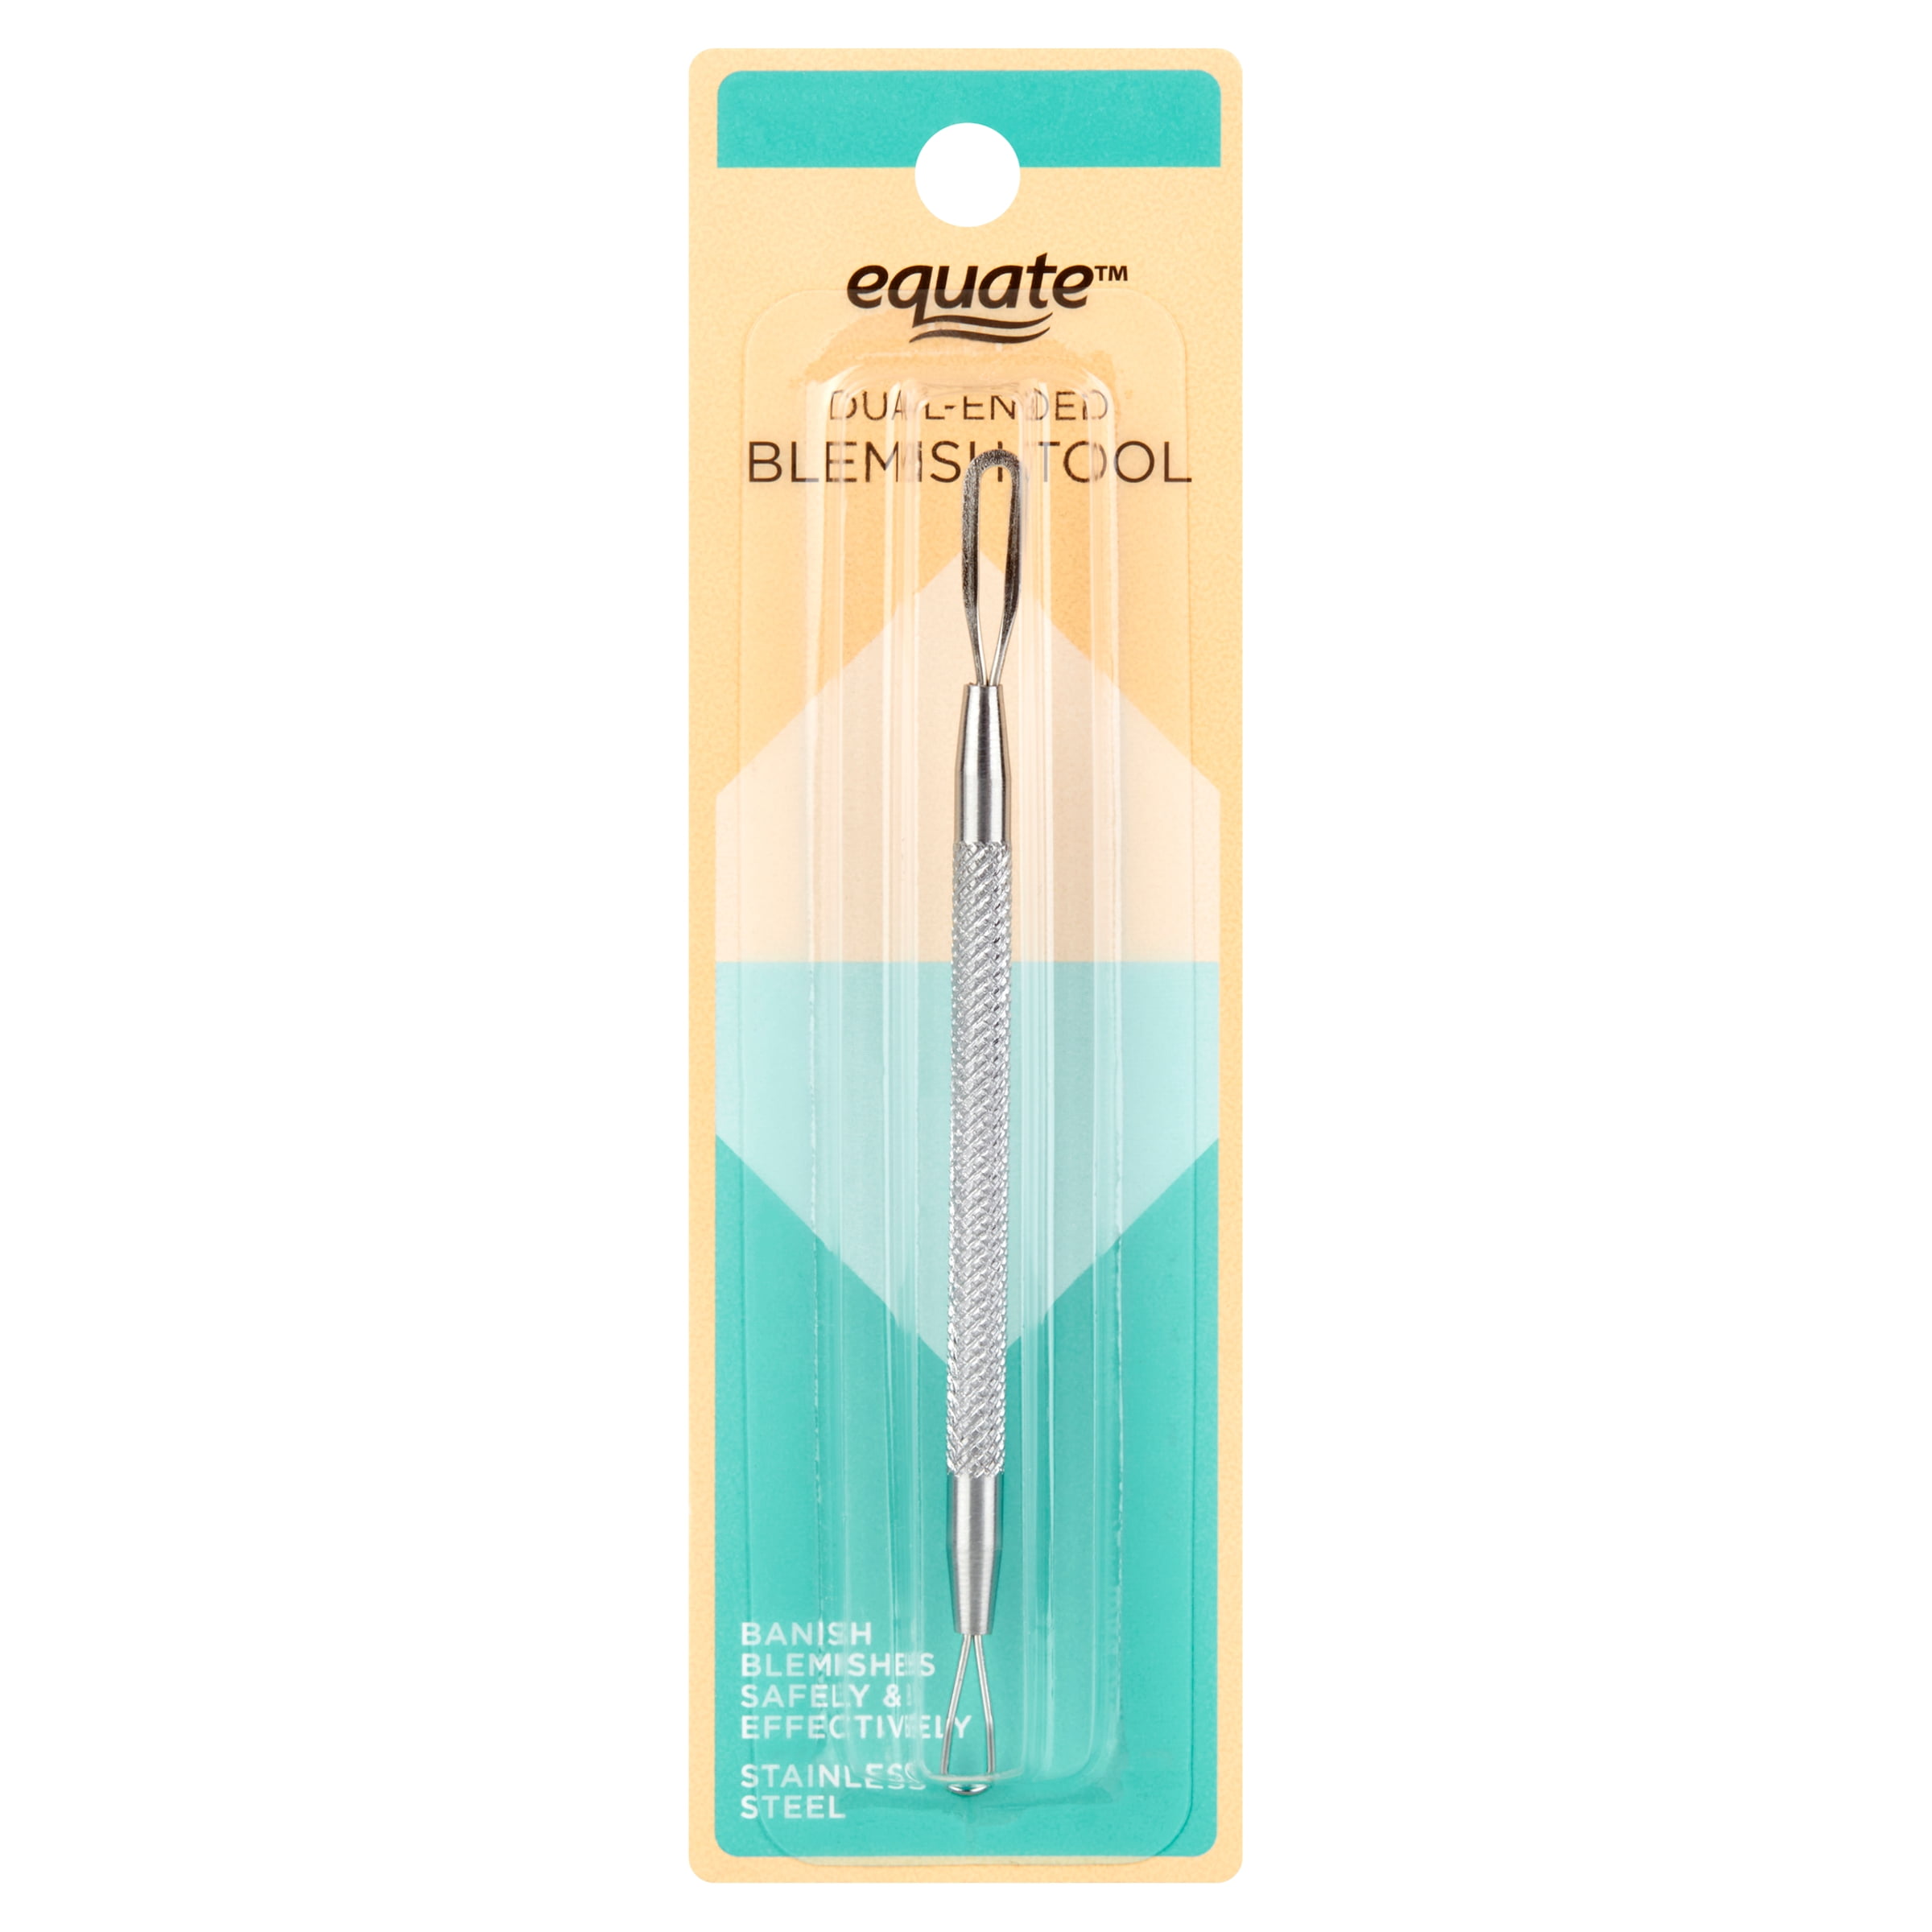 Equate Stainless Steel Dual-Ended Blemish & Pimple Extractor Tool